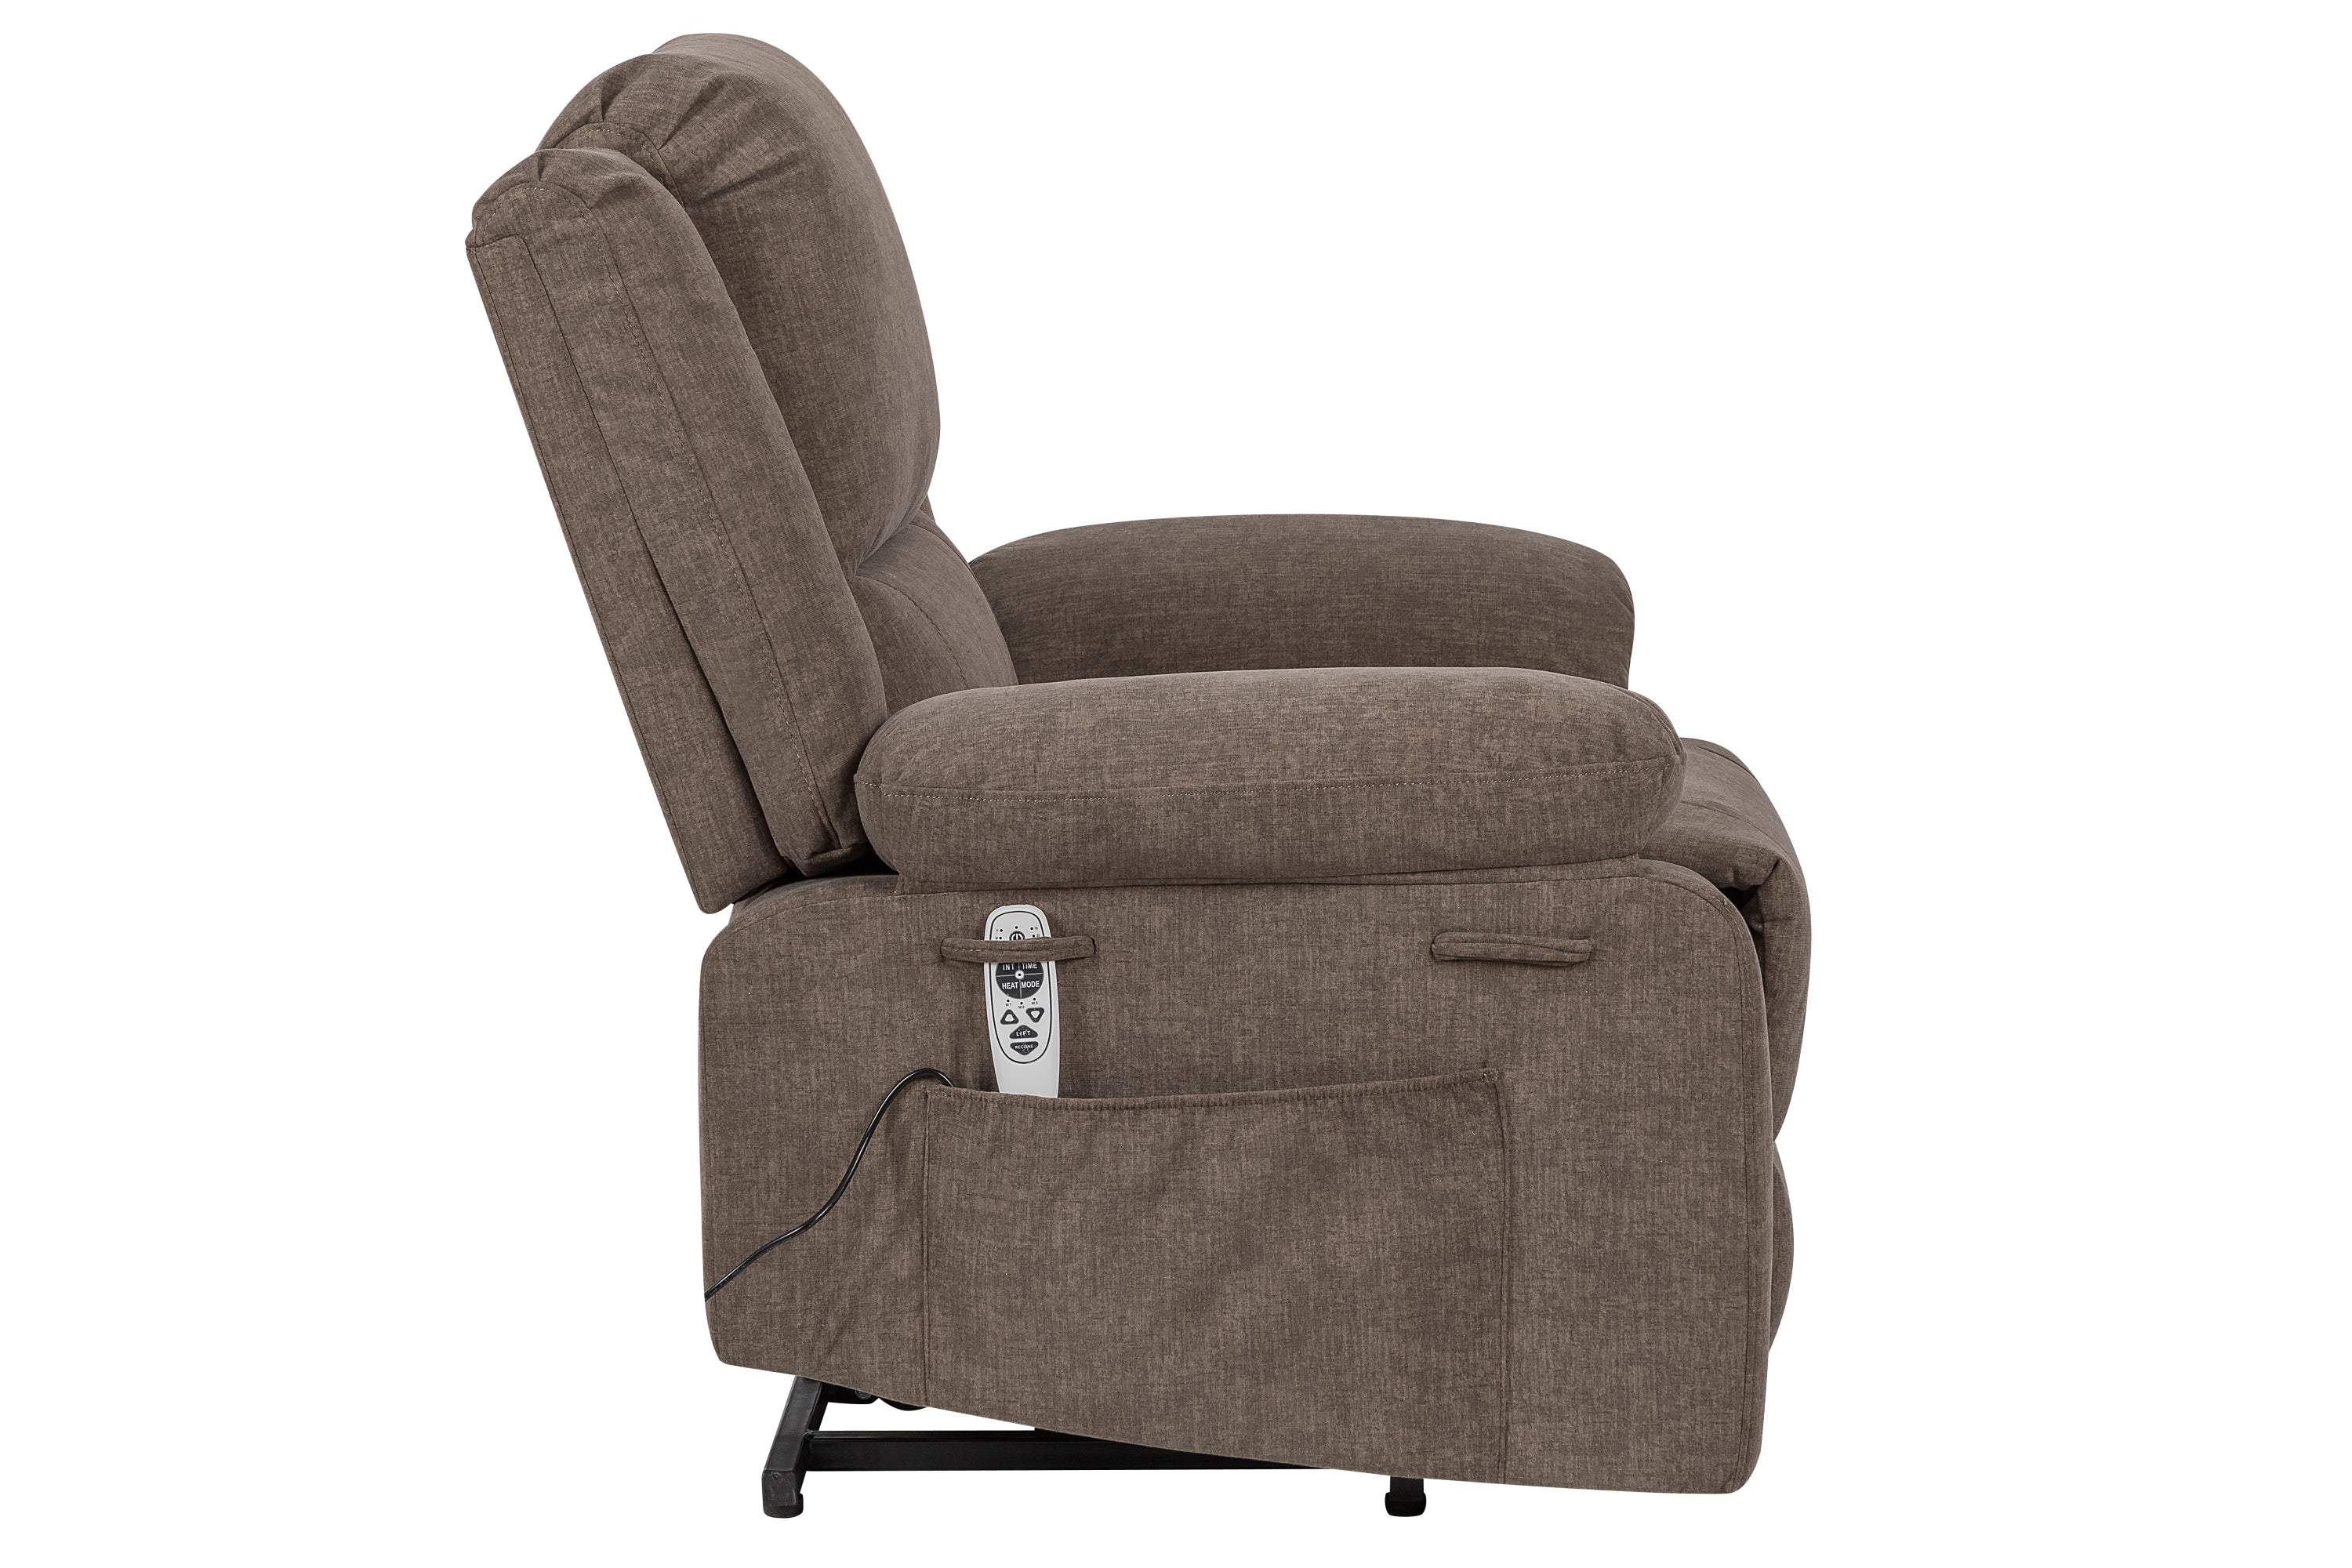 Power Lift Recliner Chair With Massage and Lumbar Heat, Brown, seated side view